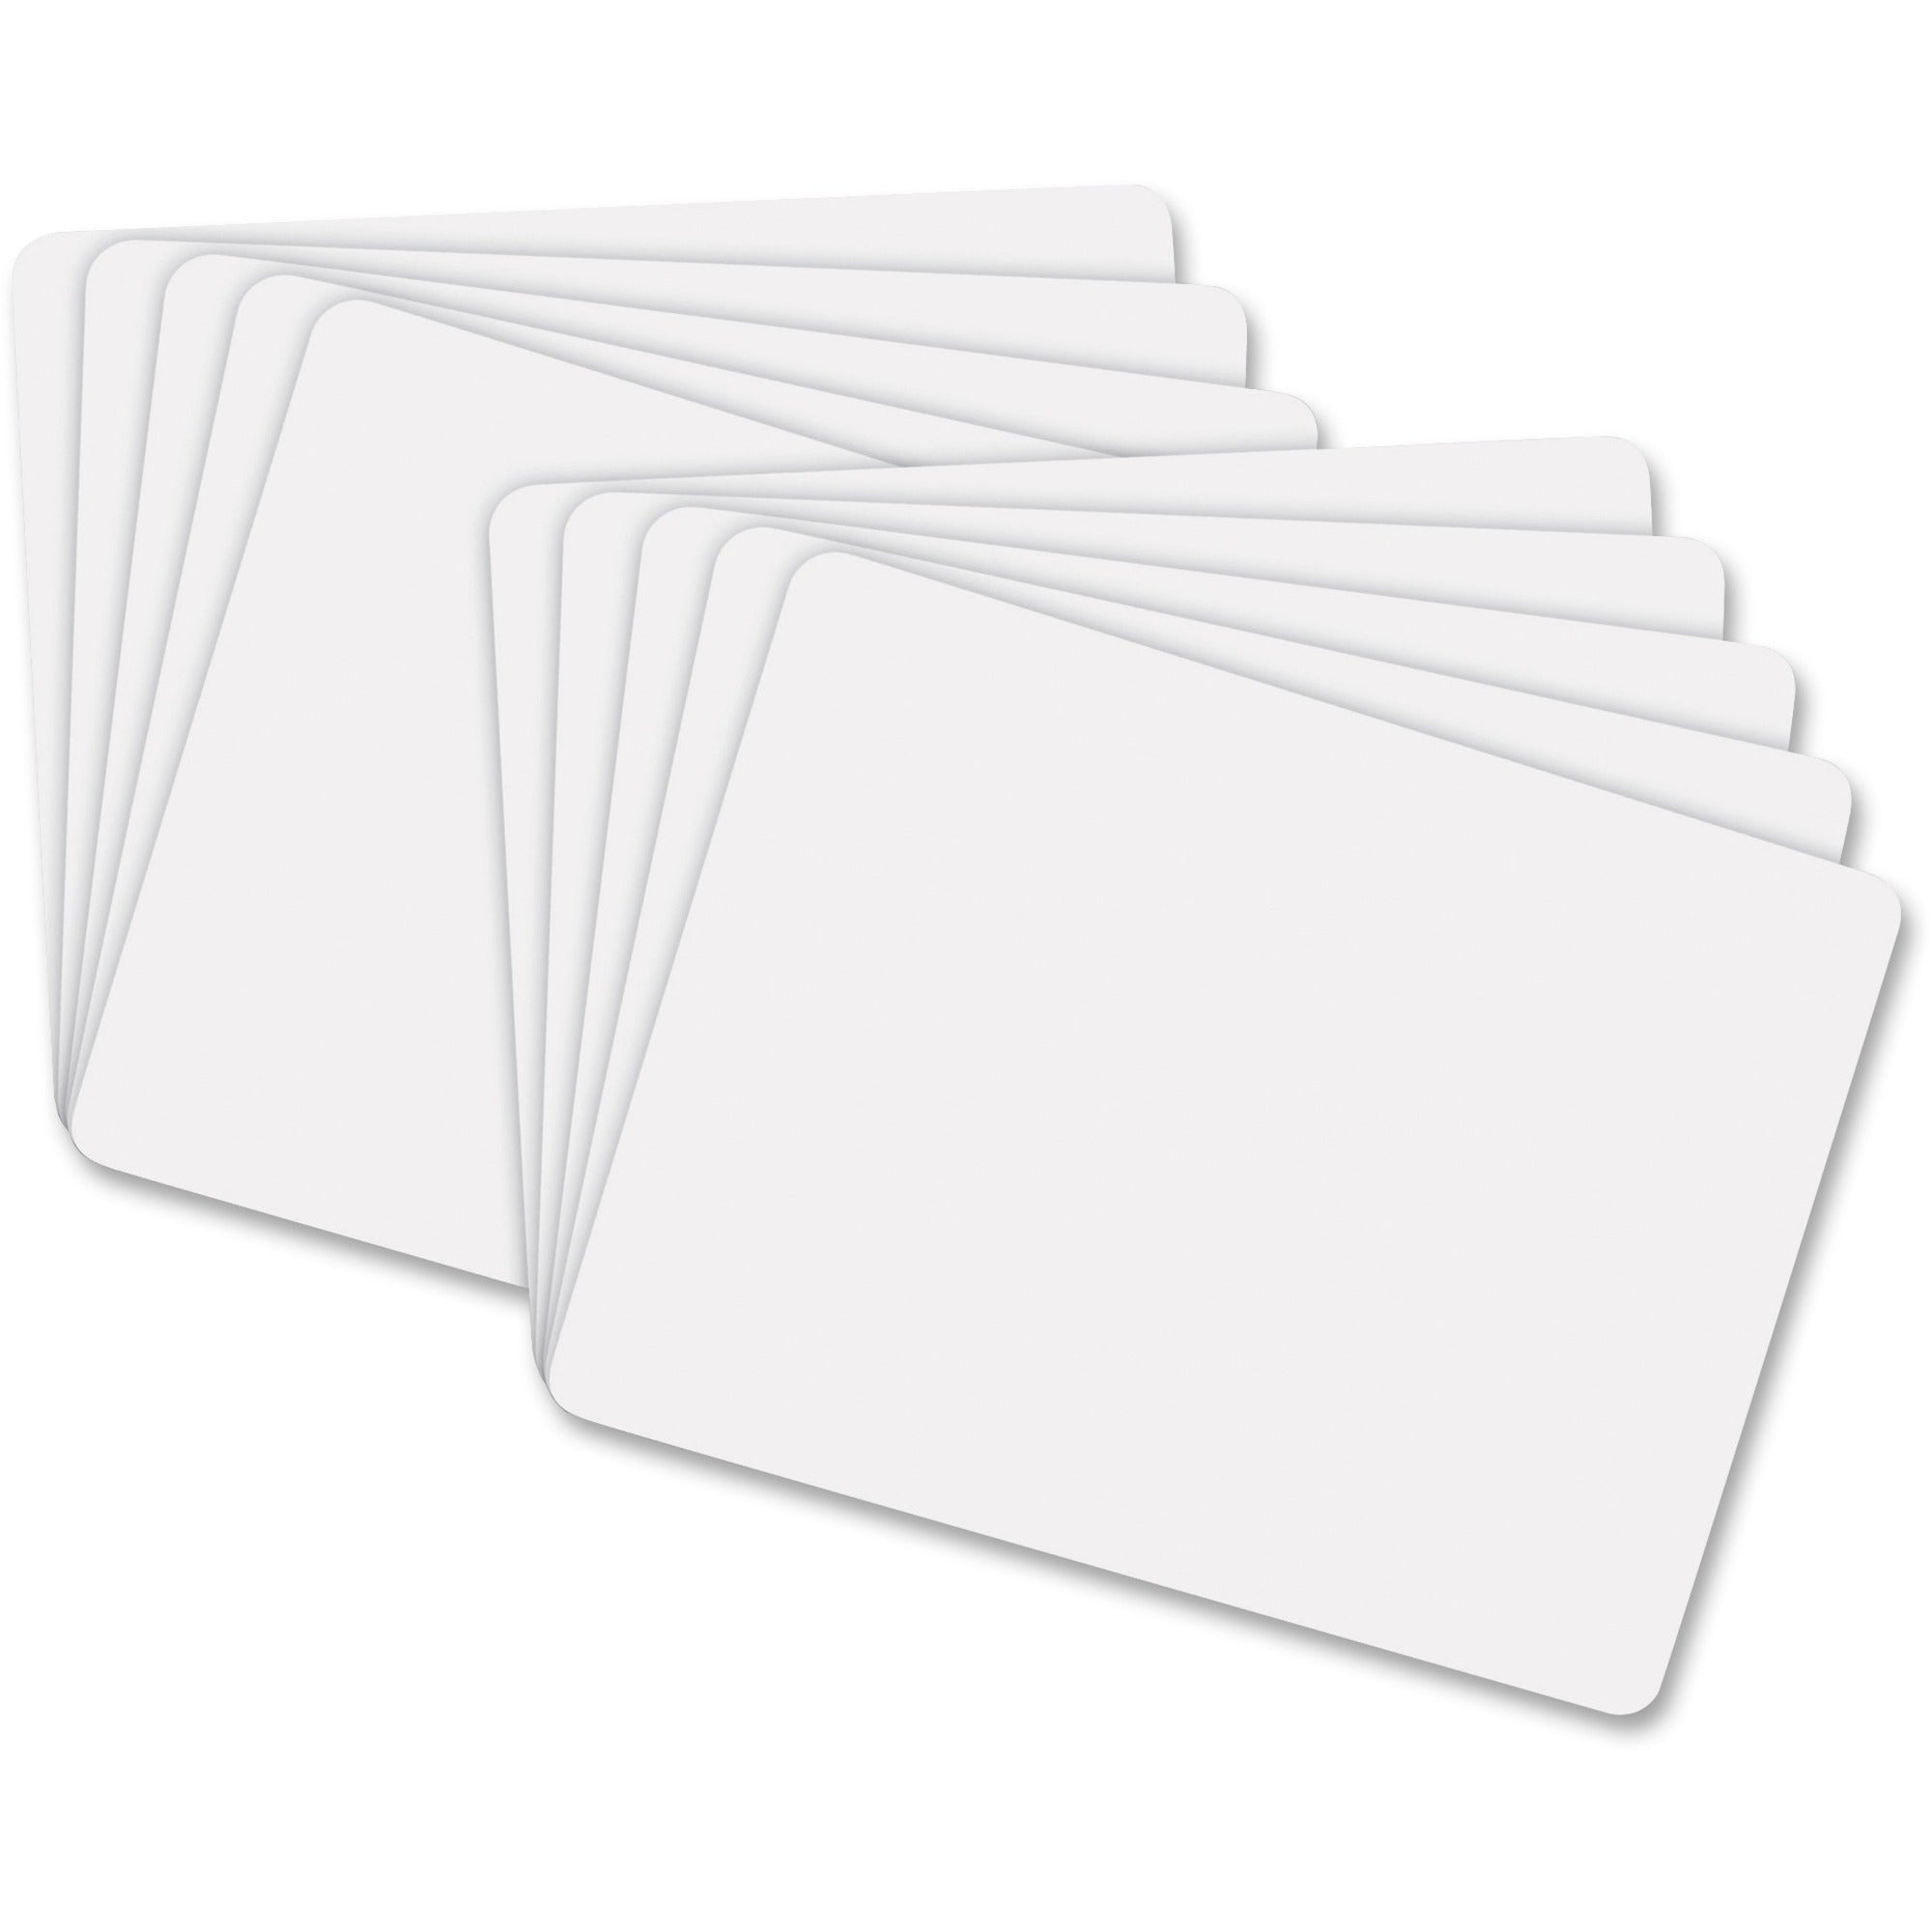 creativity-street-white-boards-12-1-ft-width-x-9-08-ft-height-white-melamine-surface-10-pack_pac988110 - 1